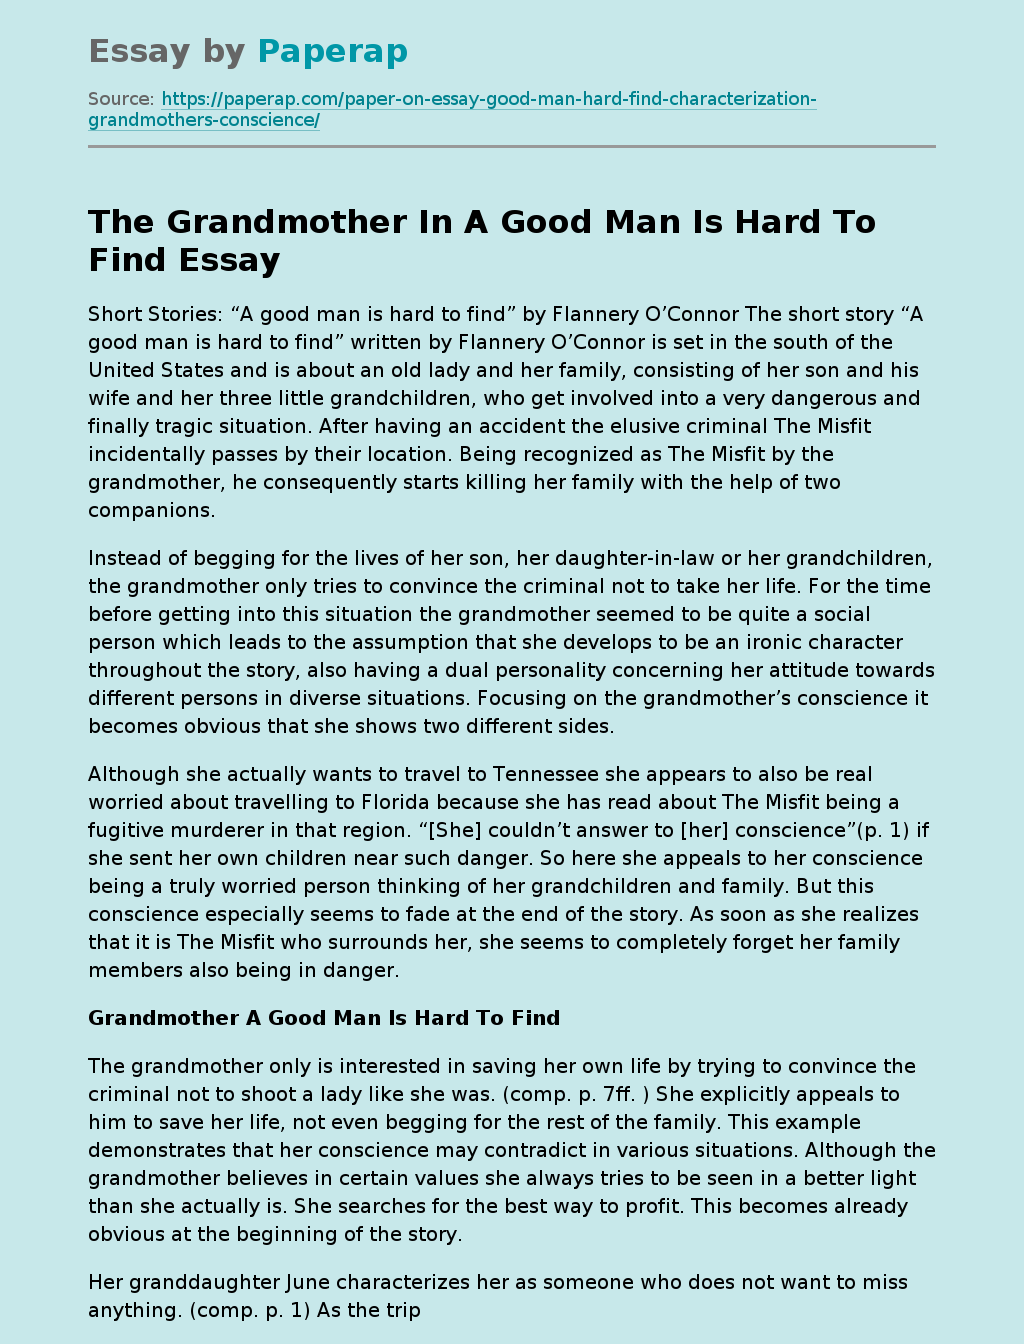 The Grandmother In A Good Man Is Hard To Find